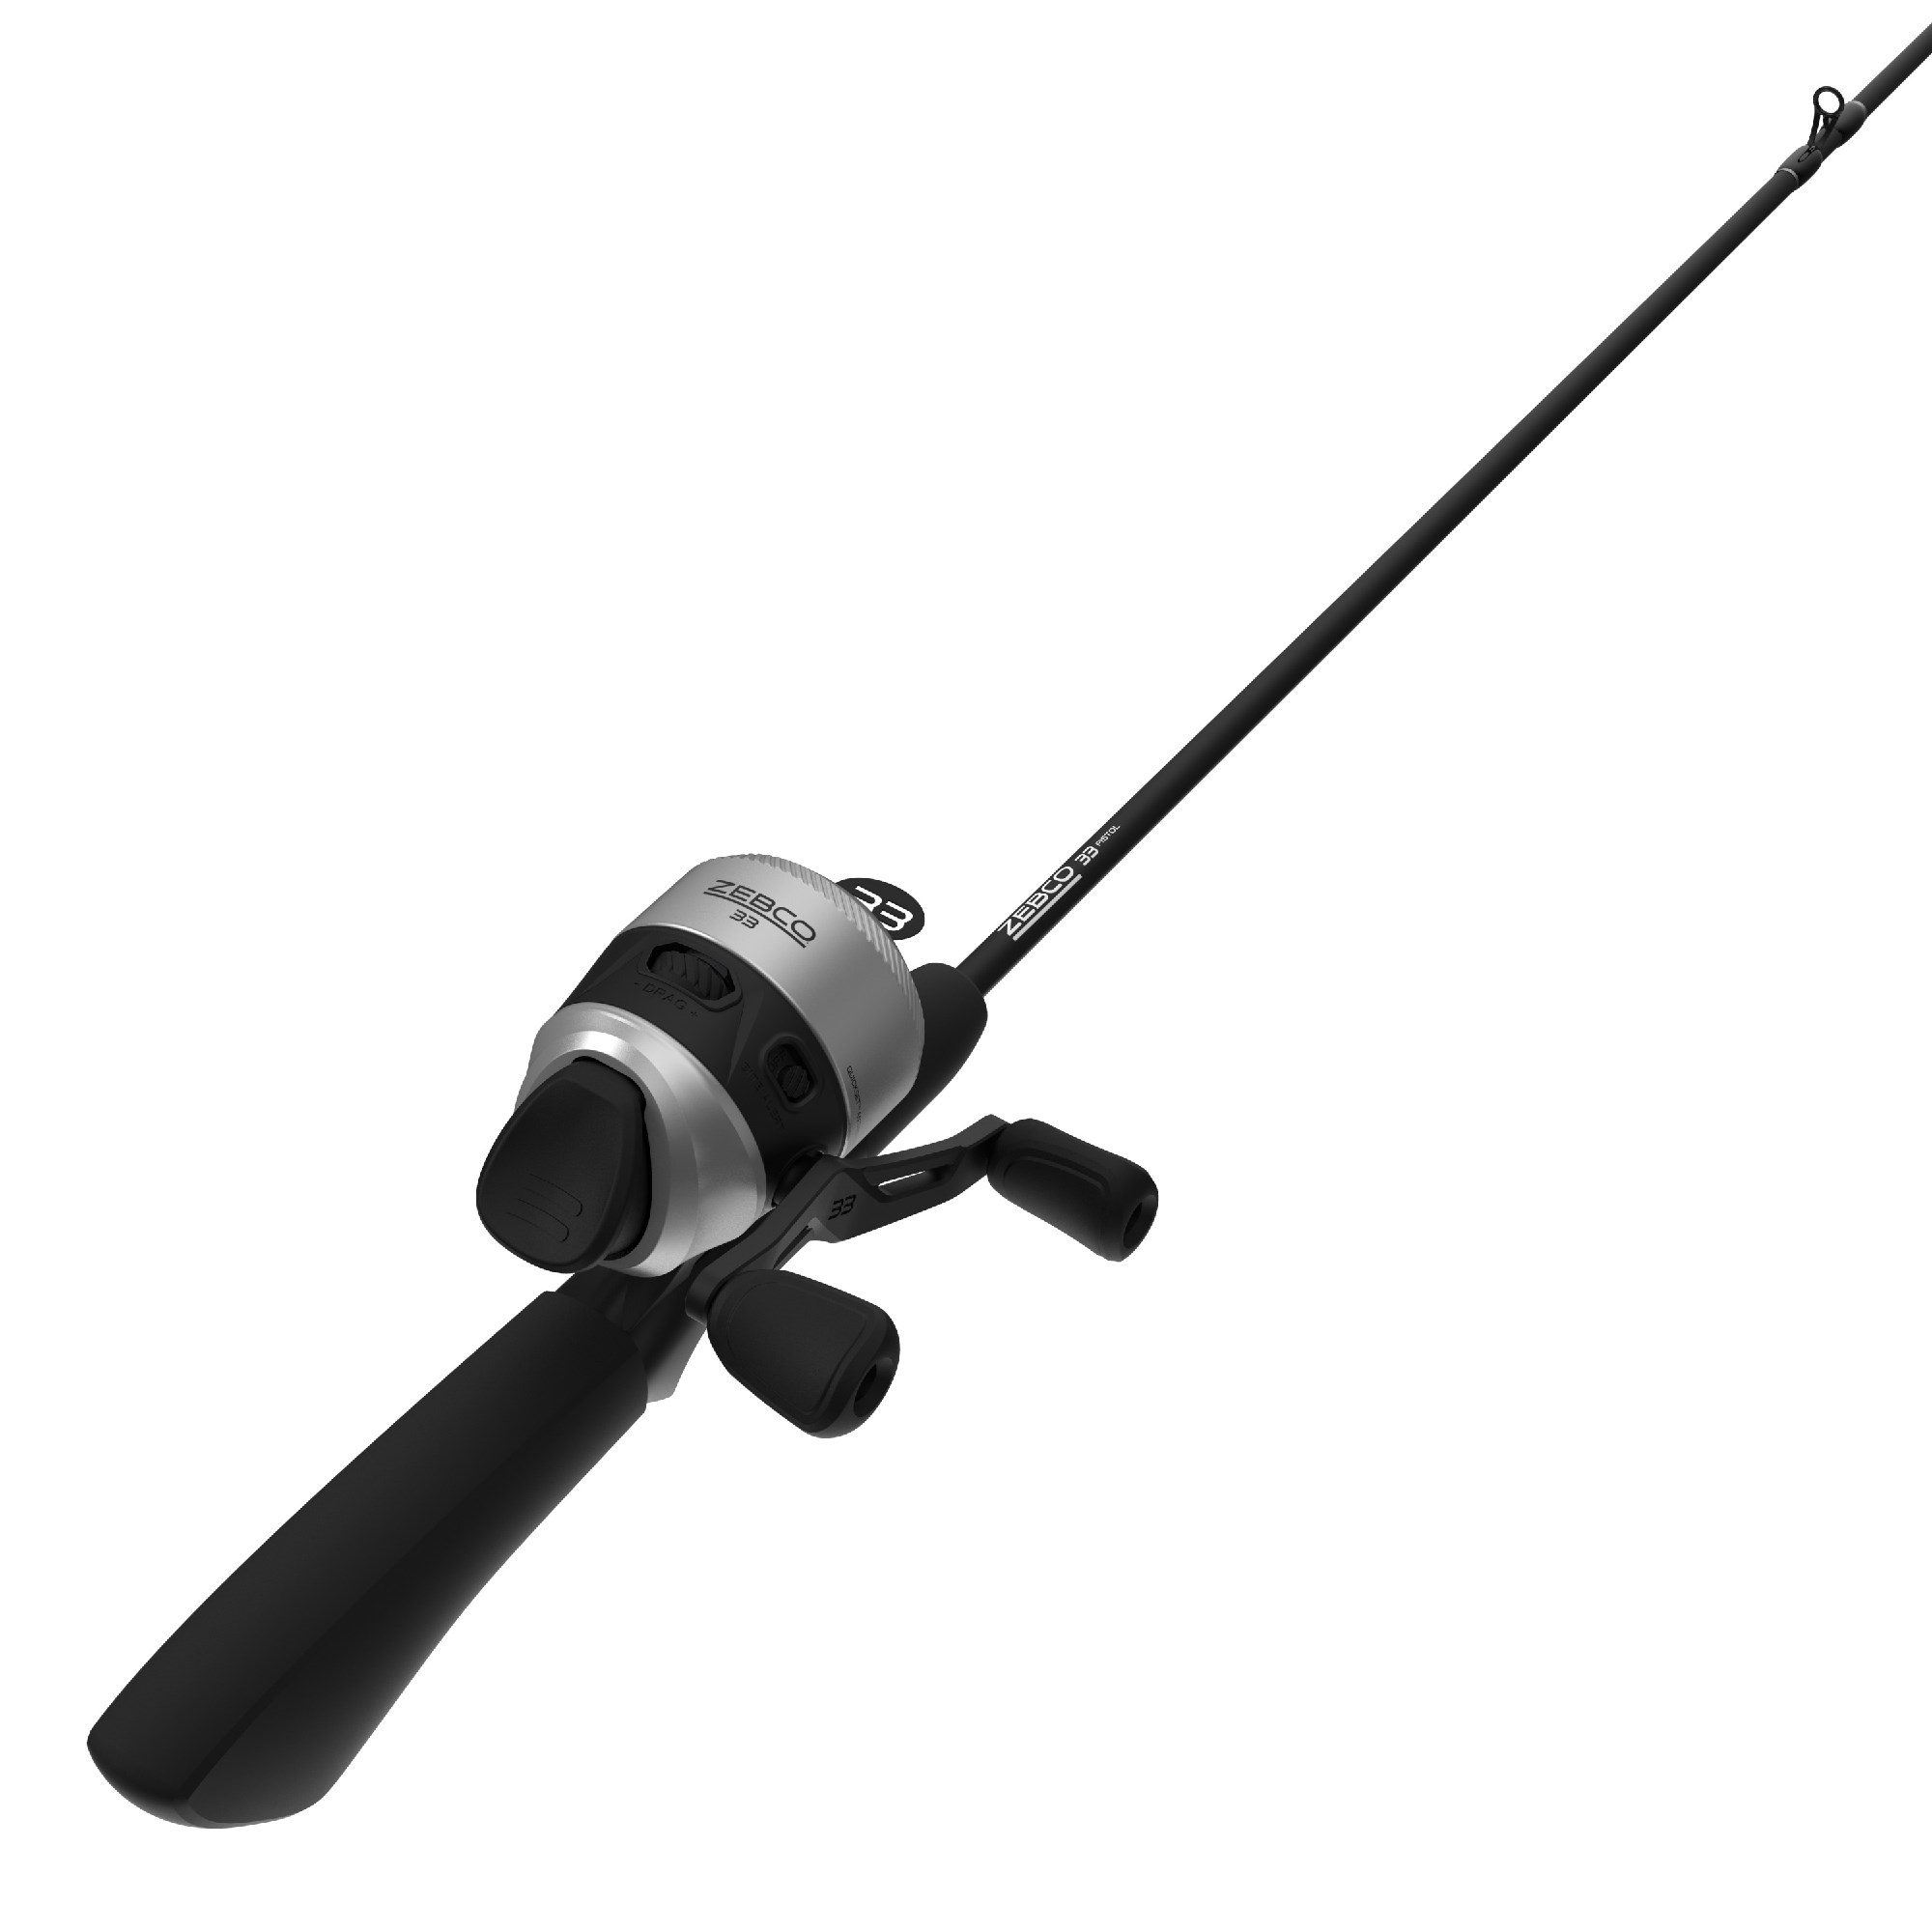  Zebco Spyn Spinning Reel and Fishing Rod Combo, 6-Foot